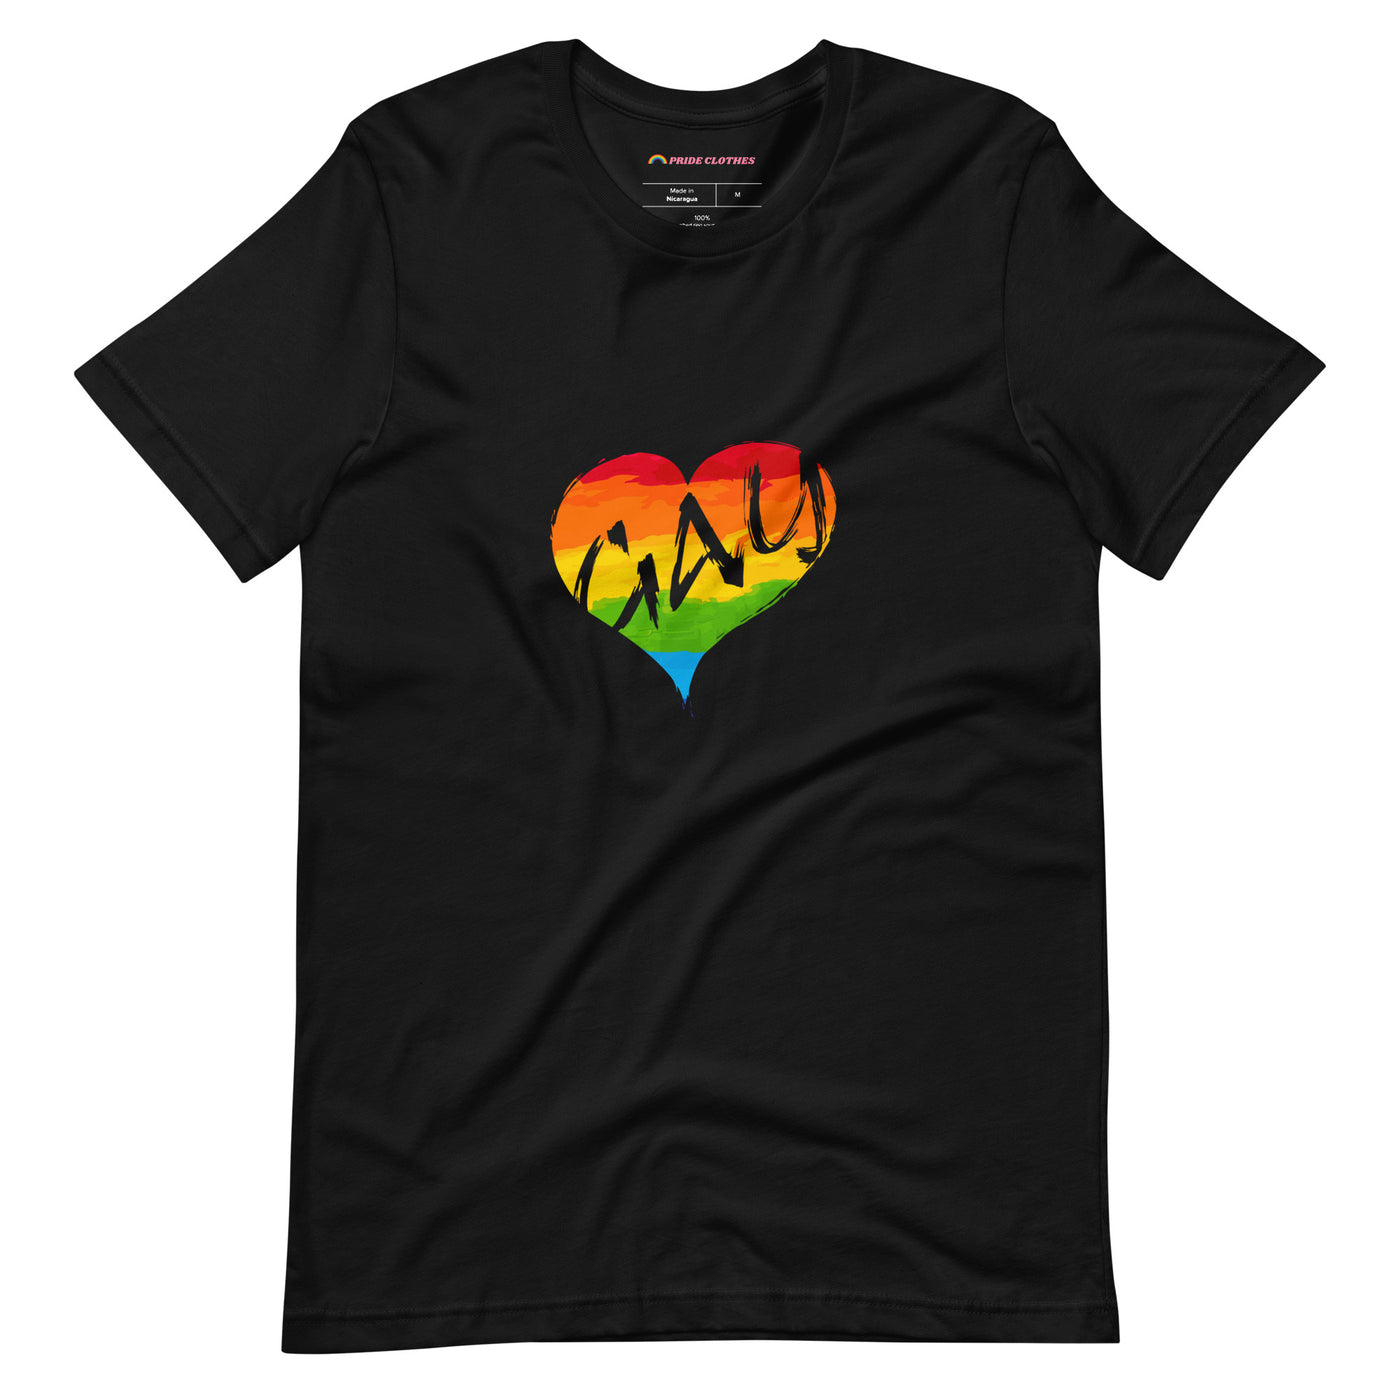 Pride Clothes - My Heart is Full Happy and Gay Rainbow TShirt - Black